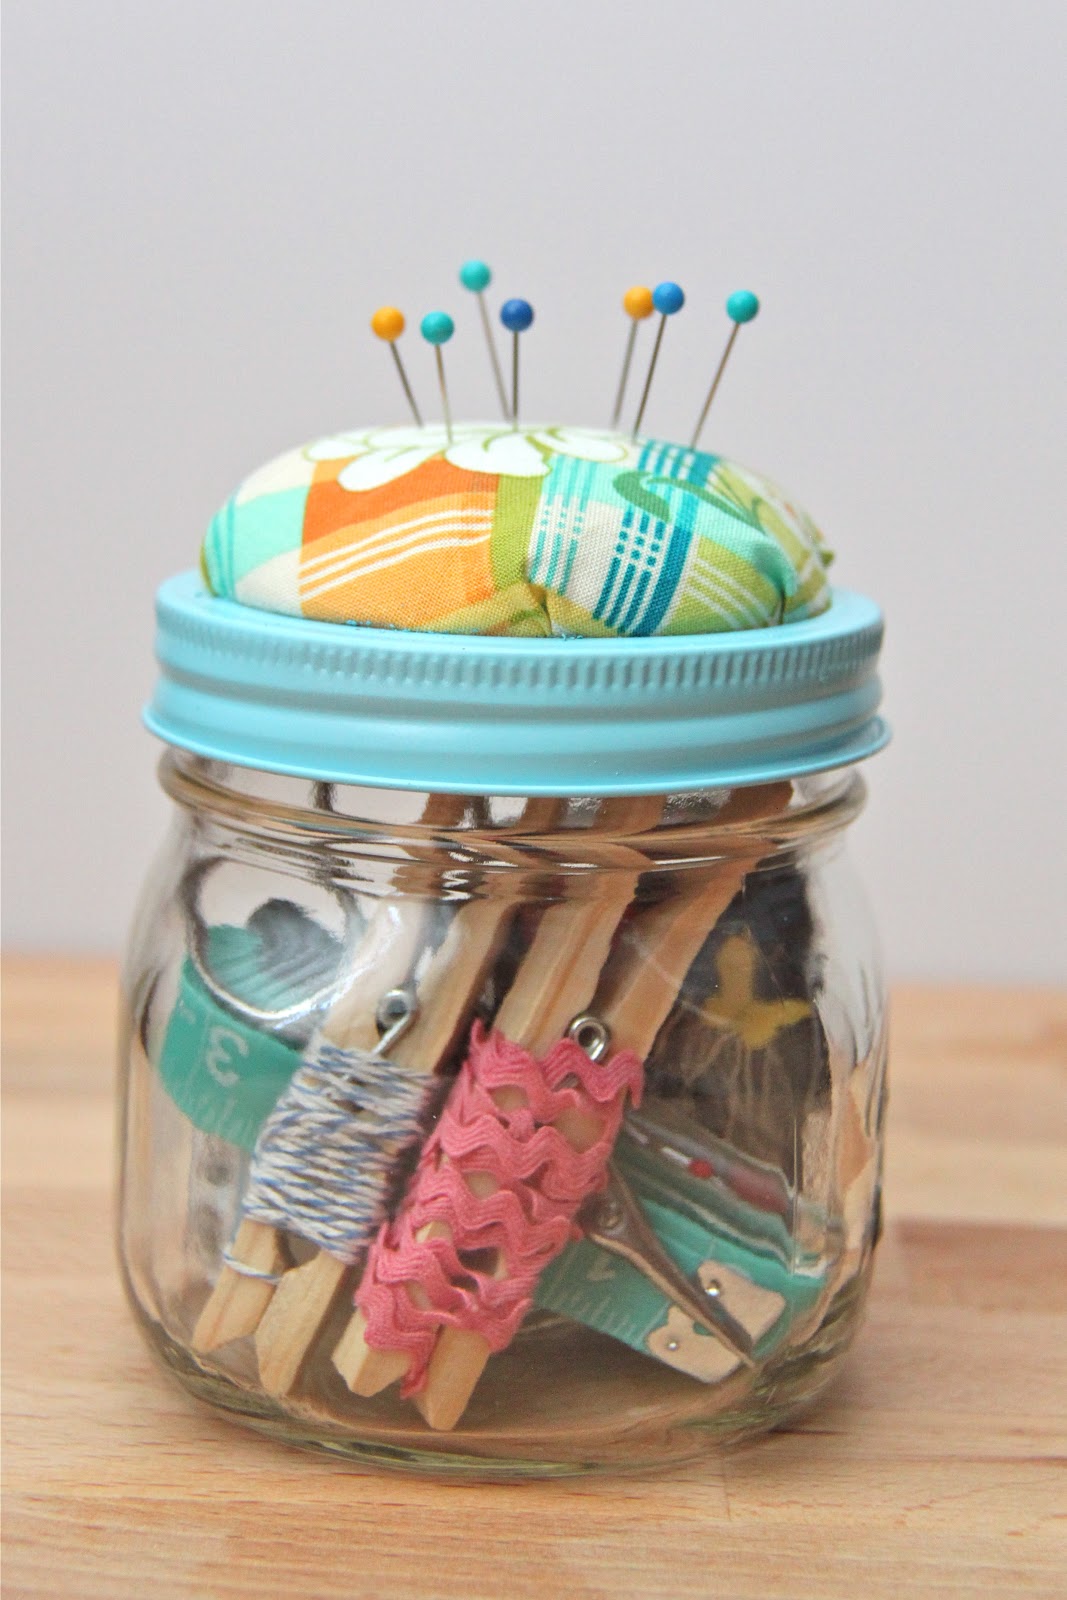 Sewing Back-to-School: Basic Sewing Supplies - Sew Sweetness